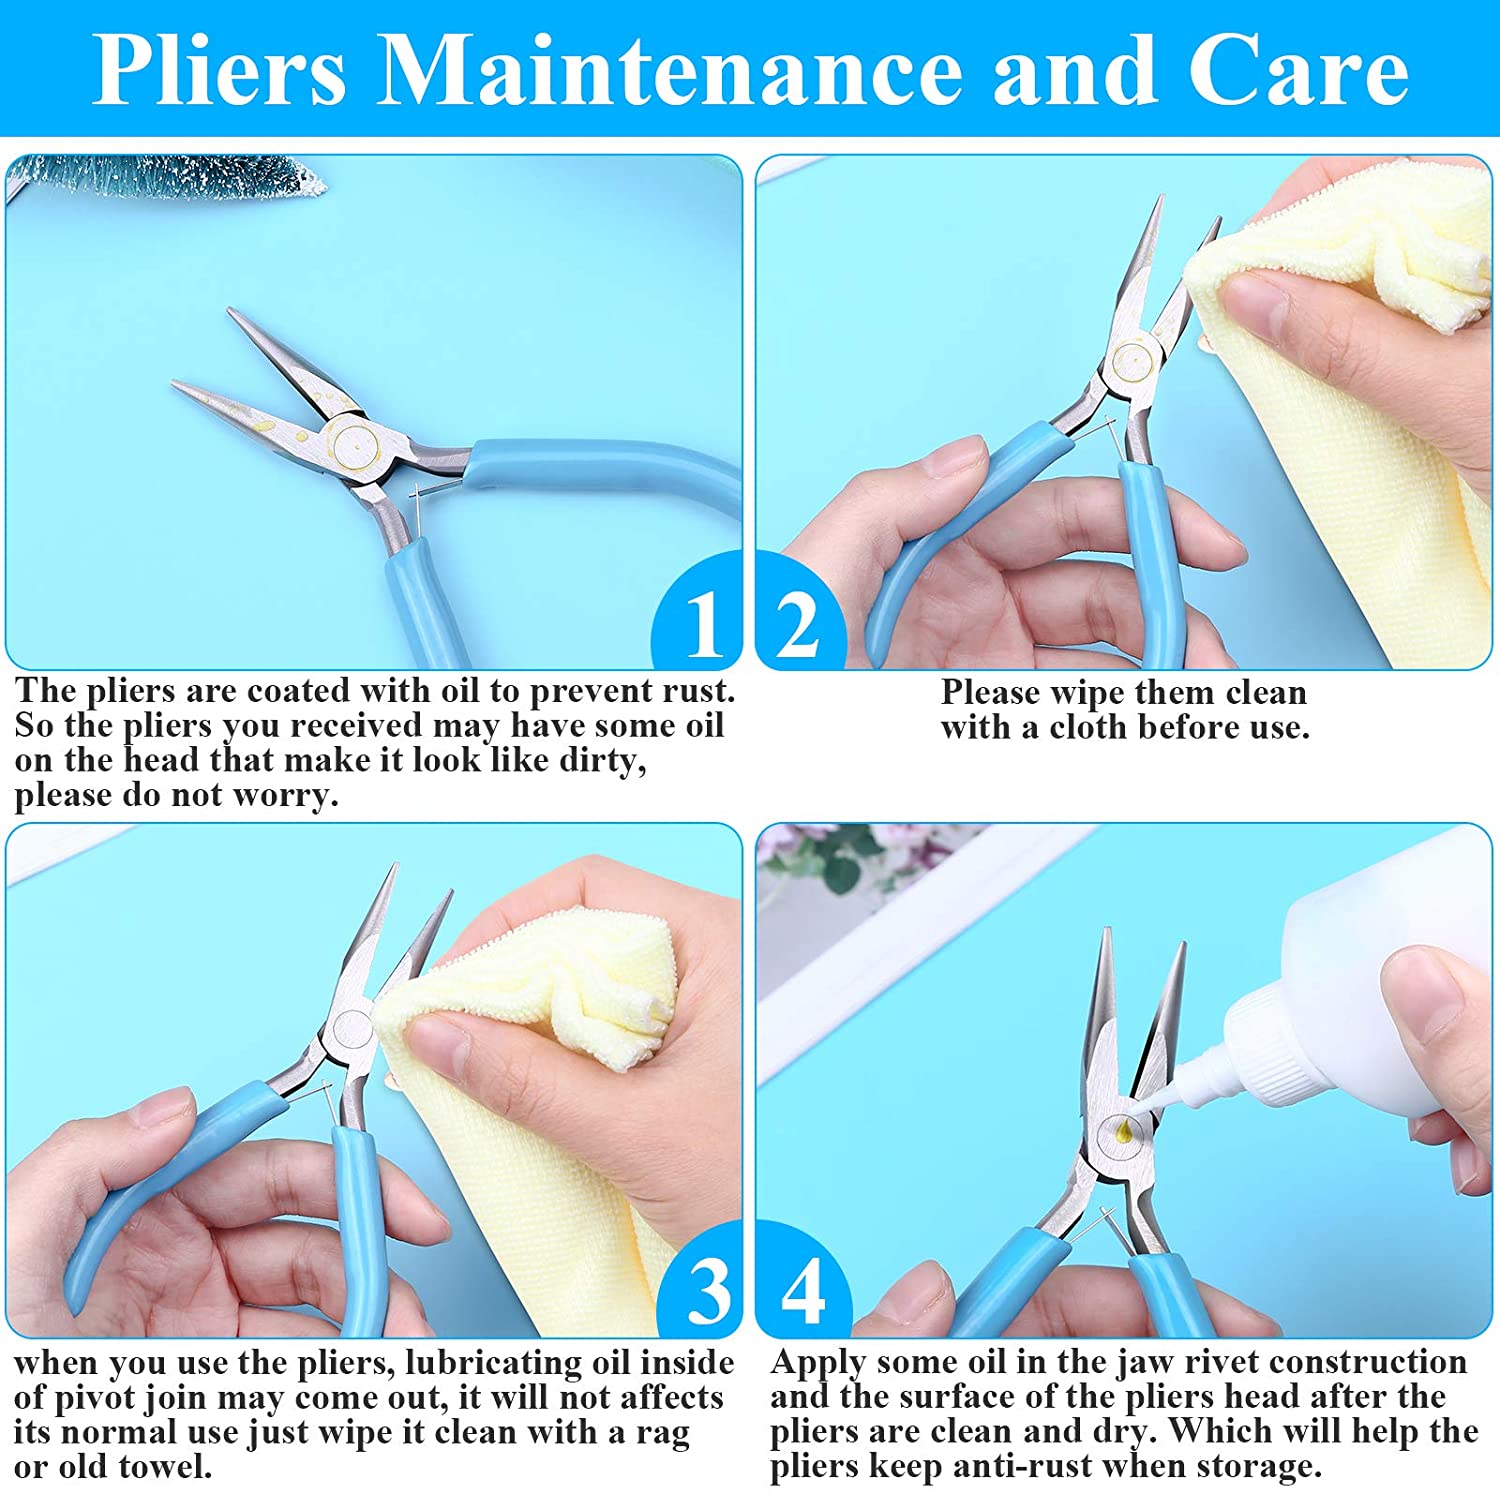 Jewelry Pliers, 3pcs Jewelry Making Pliers Tools with Needle Nose Pliers/Chain Nose Pliers, Round Nose Pliers and Wire Cutter for Jewelry Repair, Wire